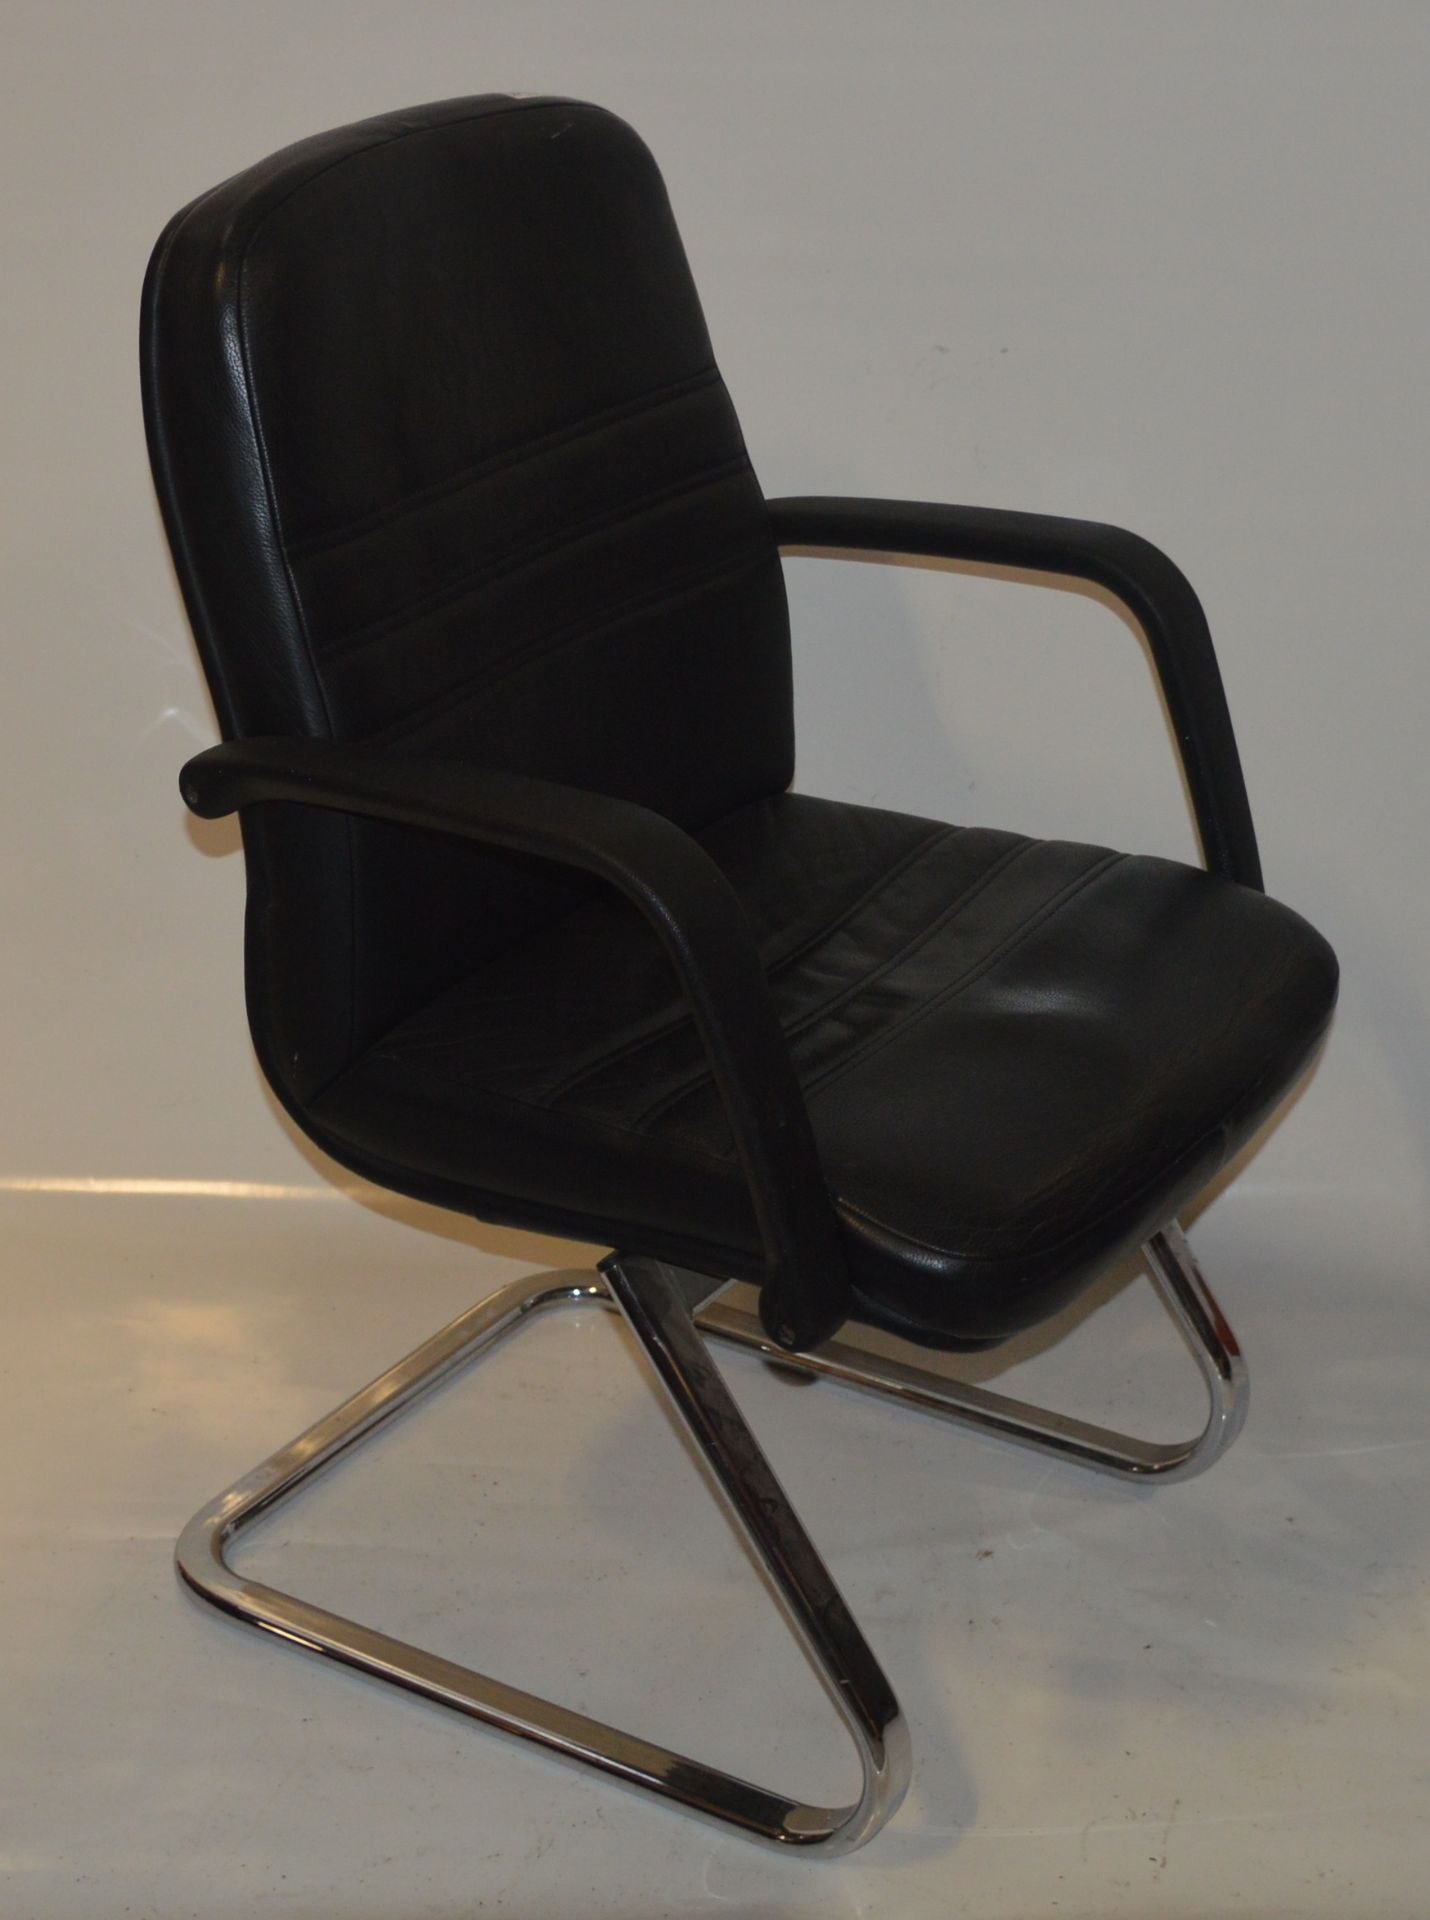 1 x Black Leather Office Chair With Chrome Base - Ref JP177 - Removed From Office Environment -